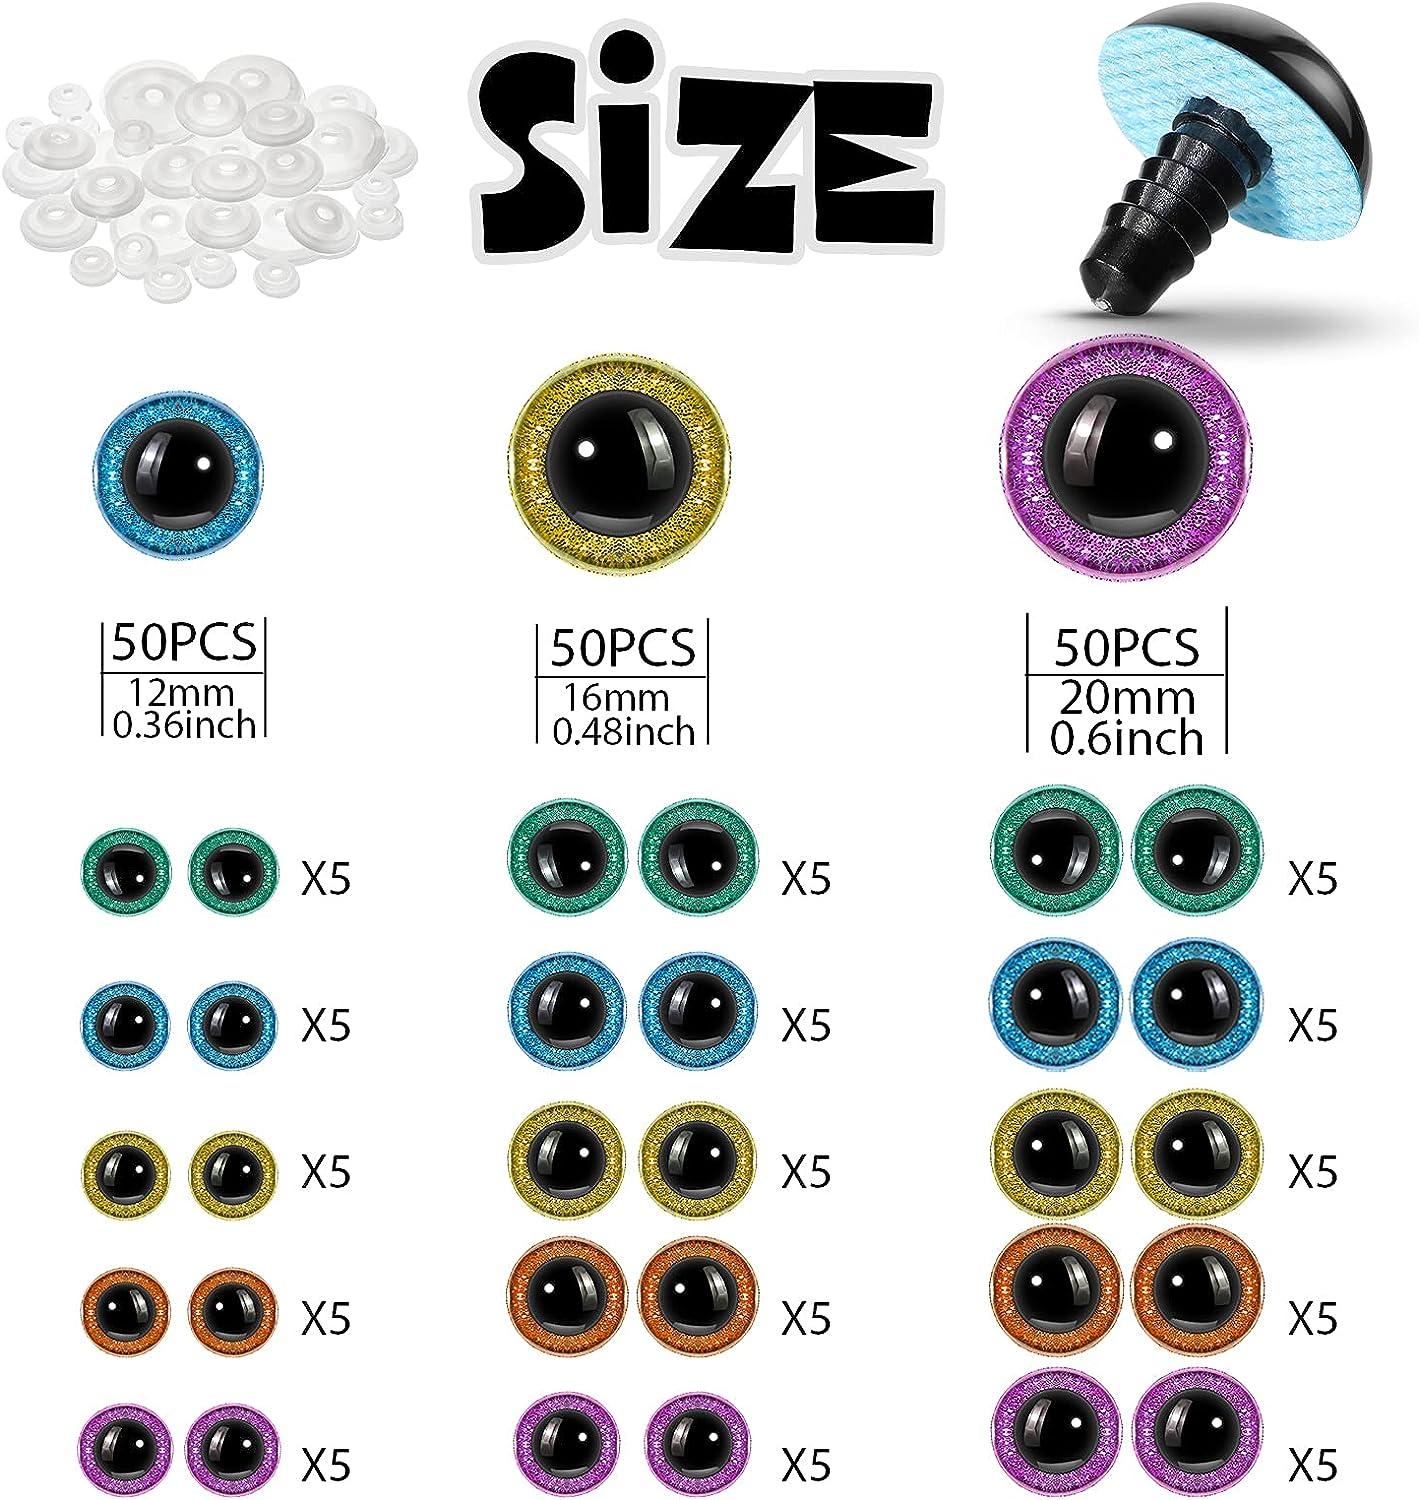 20mm Plastic Eyes for Crafts - 20mm Safety Eyes for Stuffed Animals